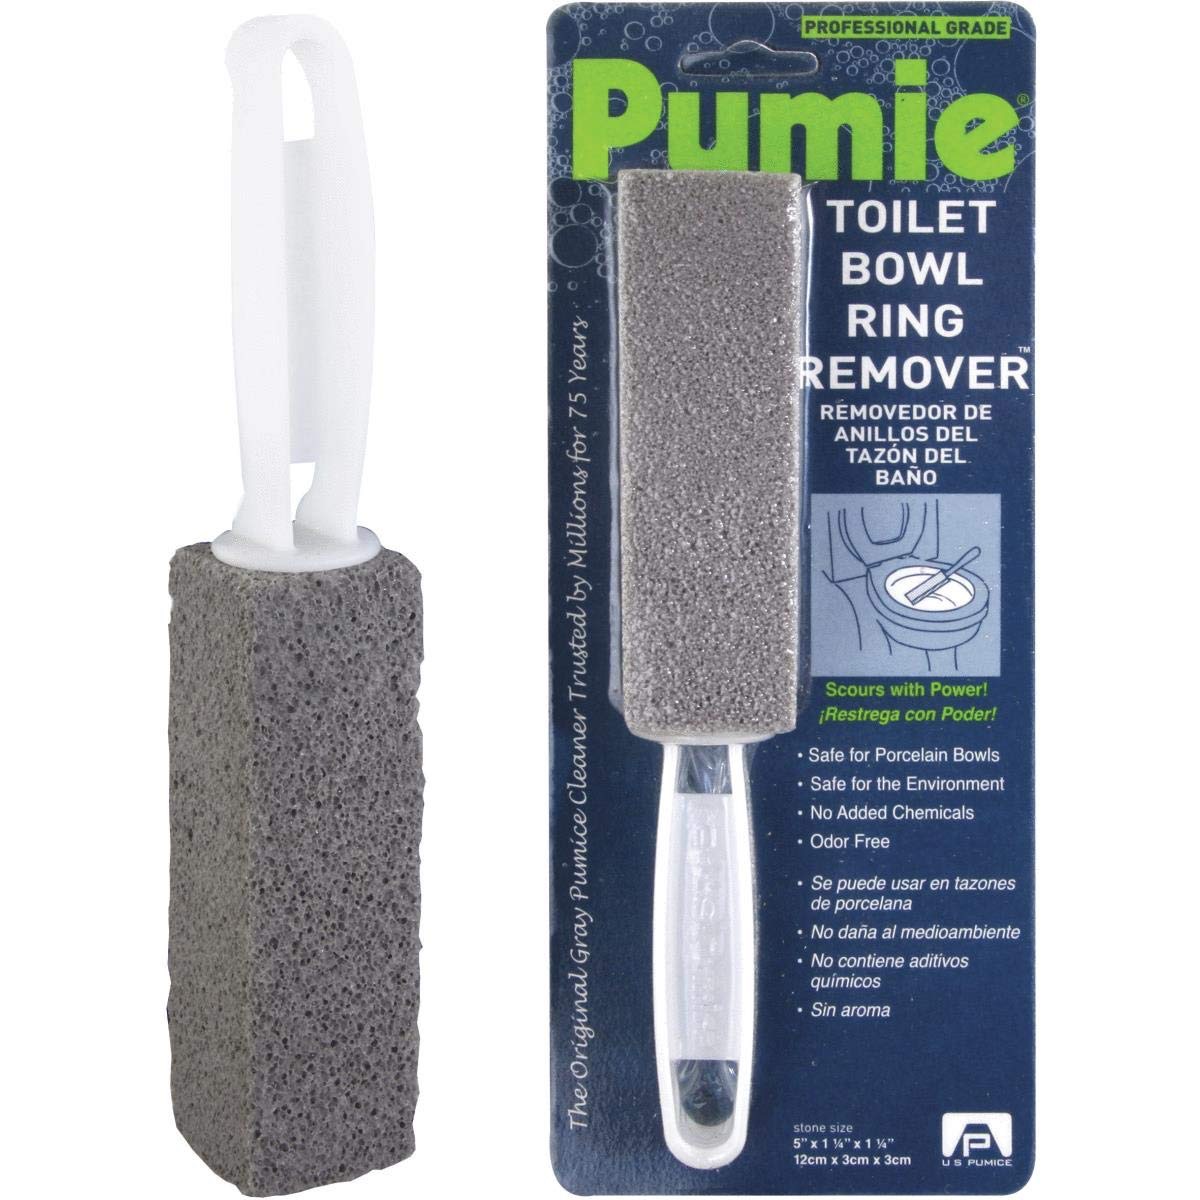 pumice stone on a stick, earth friendly cleaning products